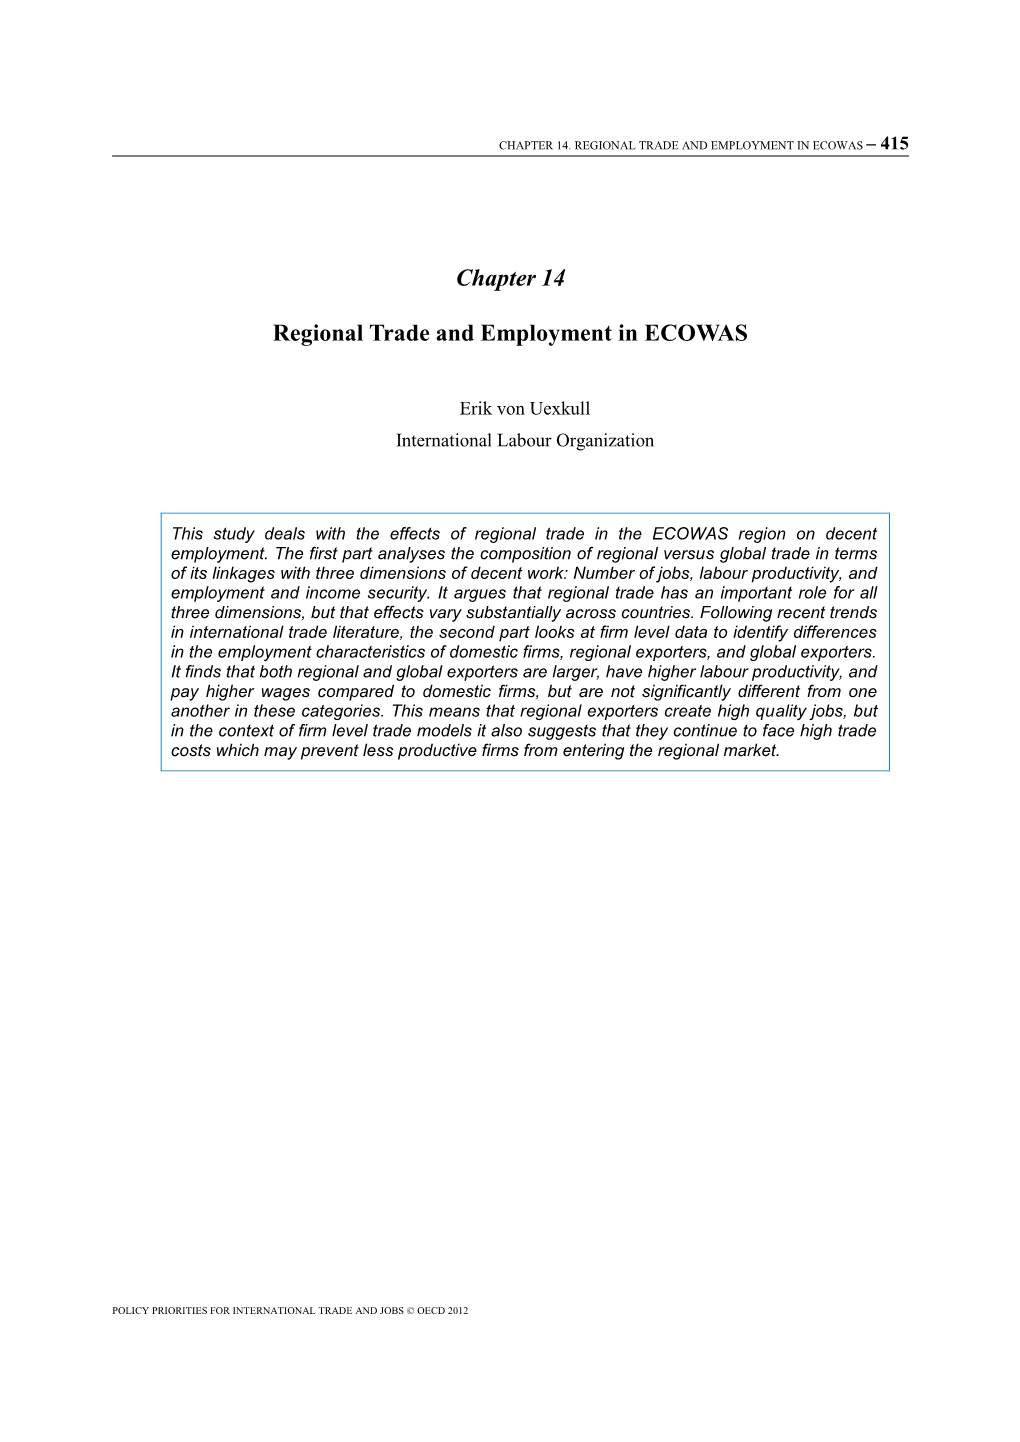 Regional Trade and Employment in Ecowas – 415